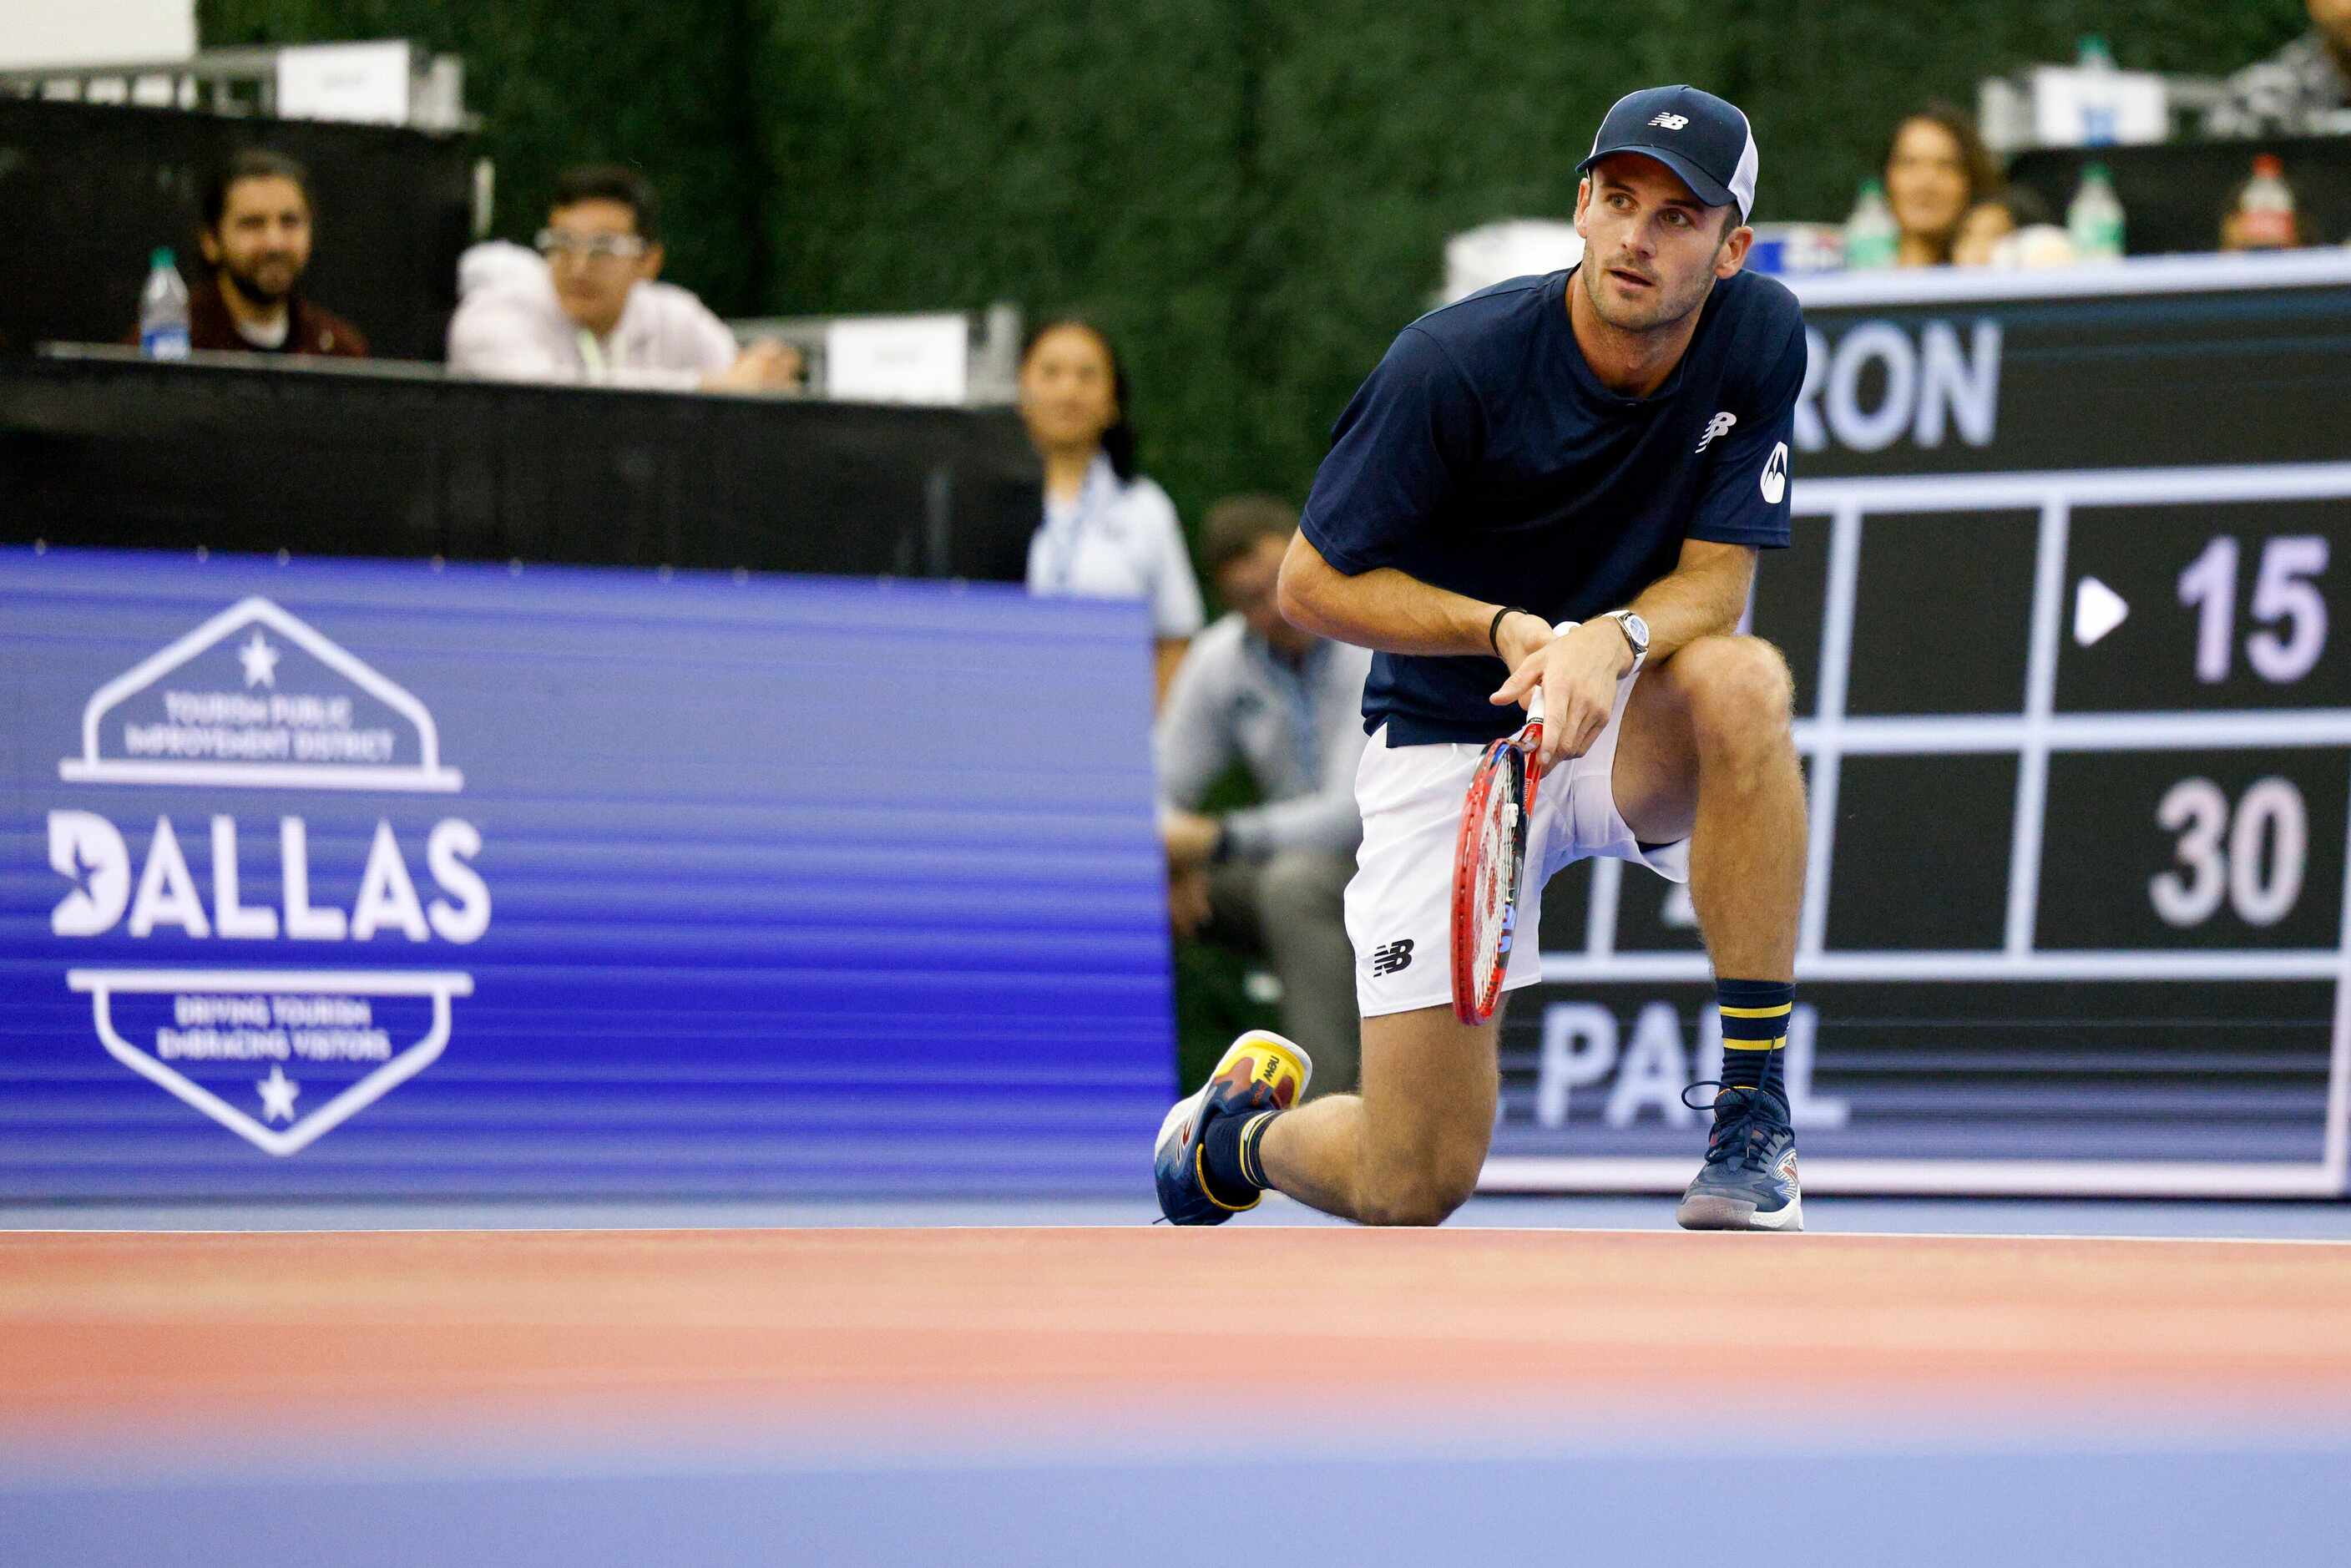 Tommy Paul of the U.S. reacts after hitting a shot out of bounds during the second set of...